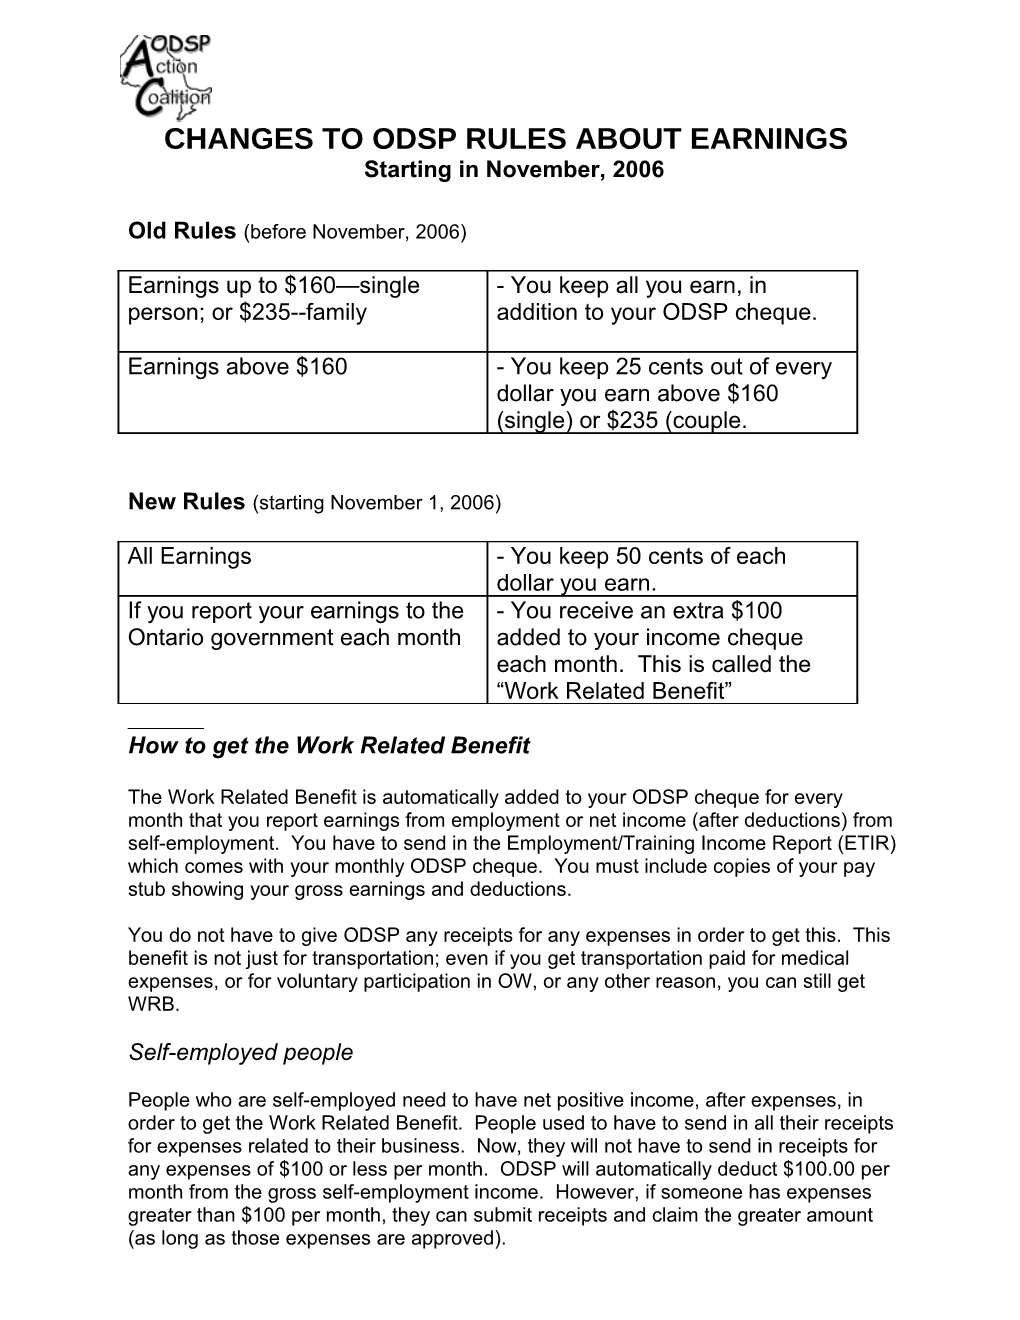 Changes to Odsp Rules About Earnings